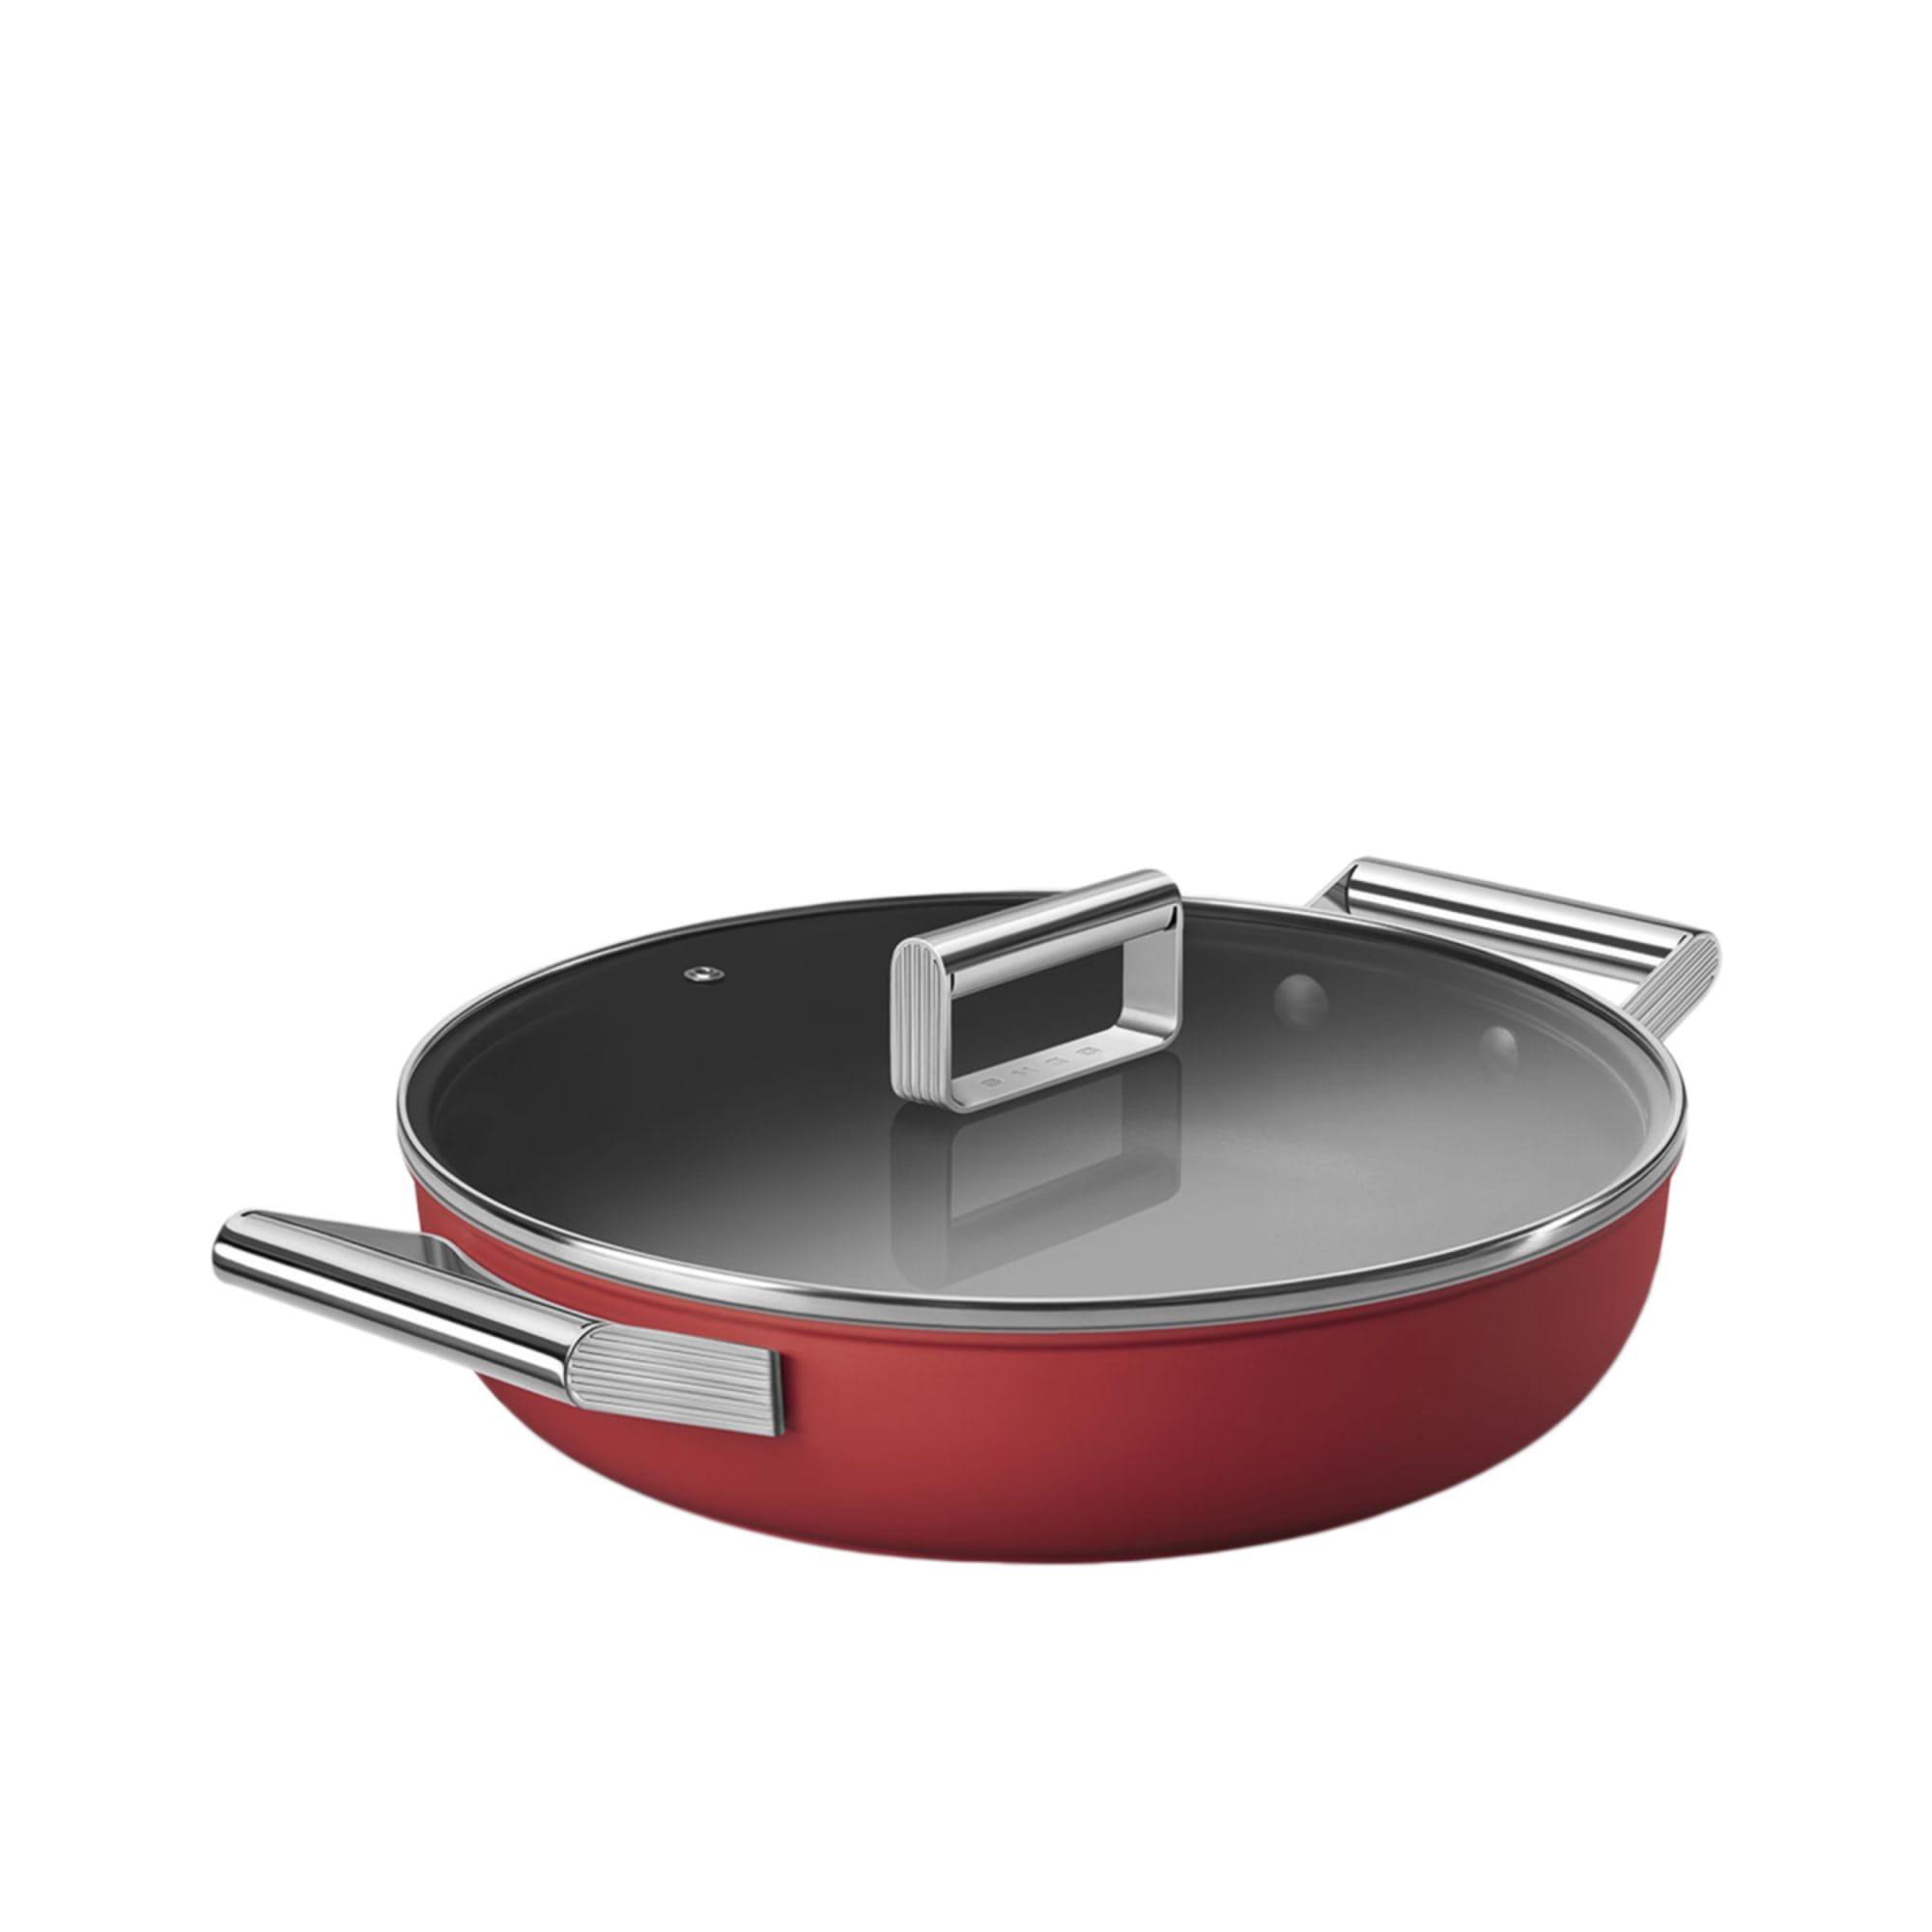 Smeg Non Stick Chef's Pan with Lid 28cm - 3.7L Red Image 6